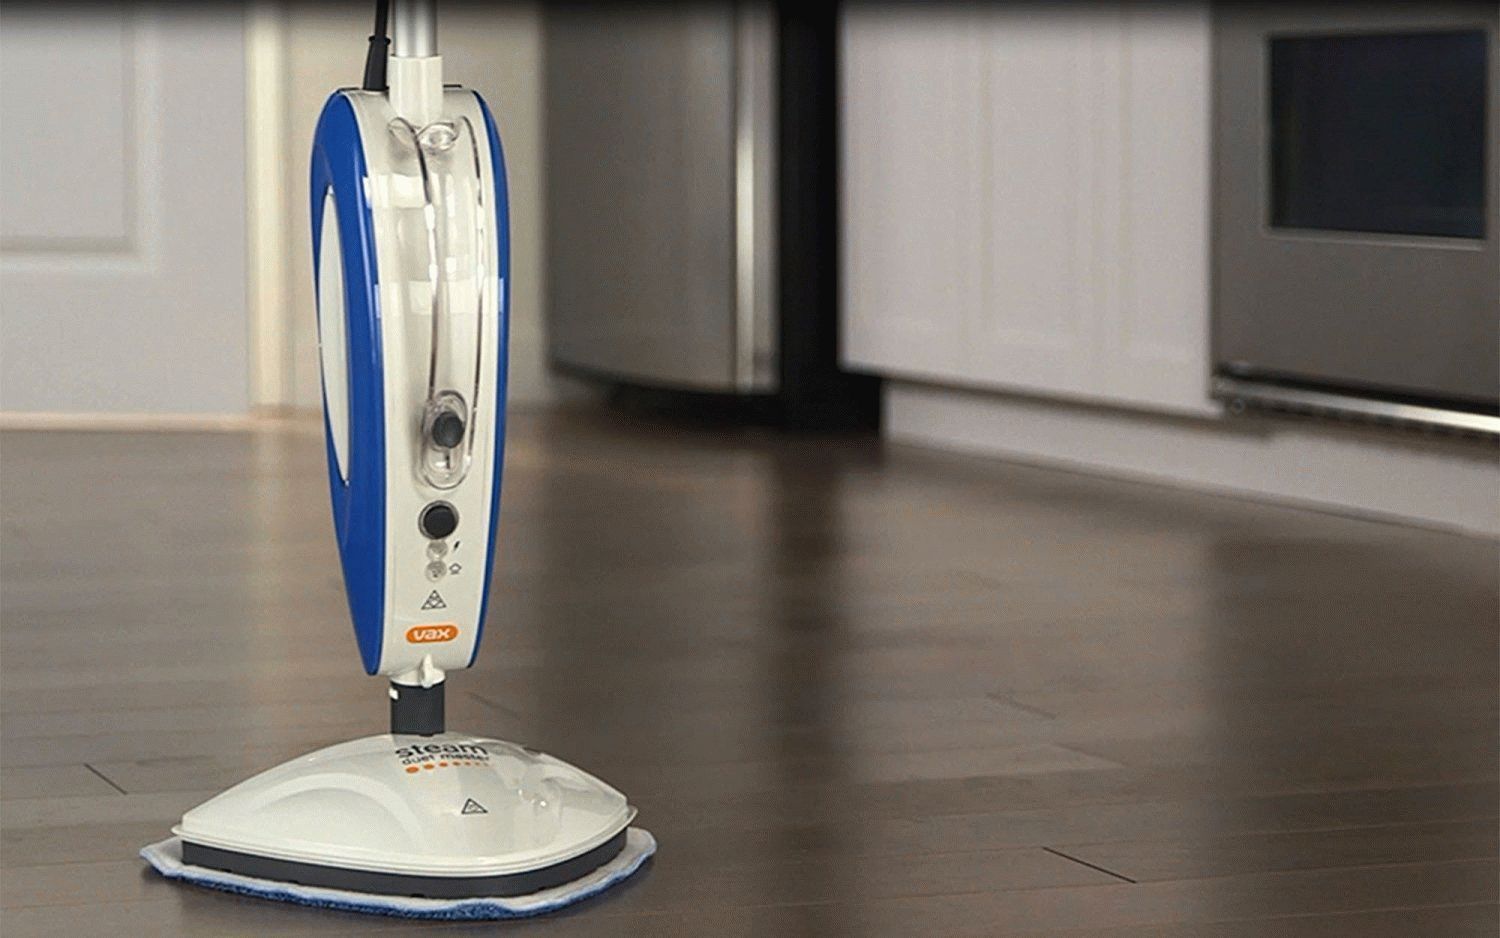 Best steam cleaners for home in 2019